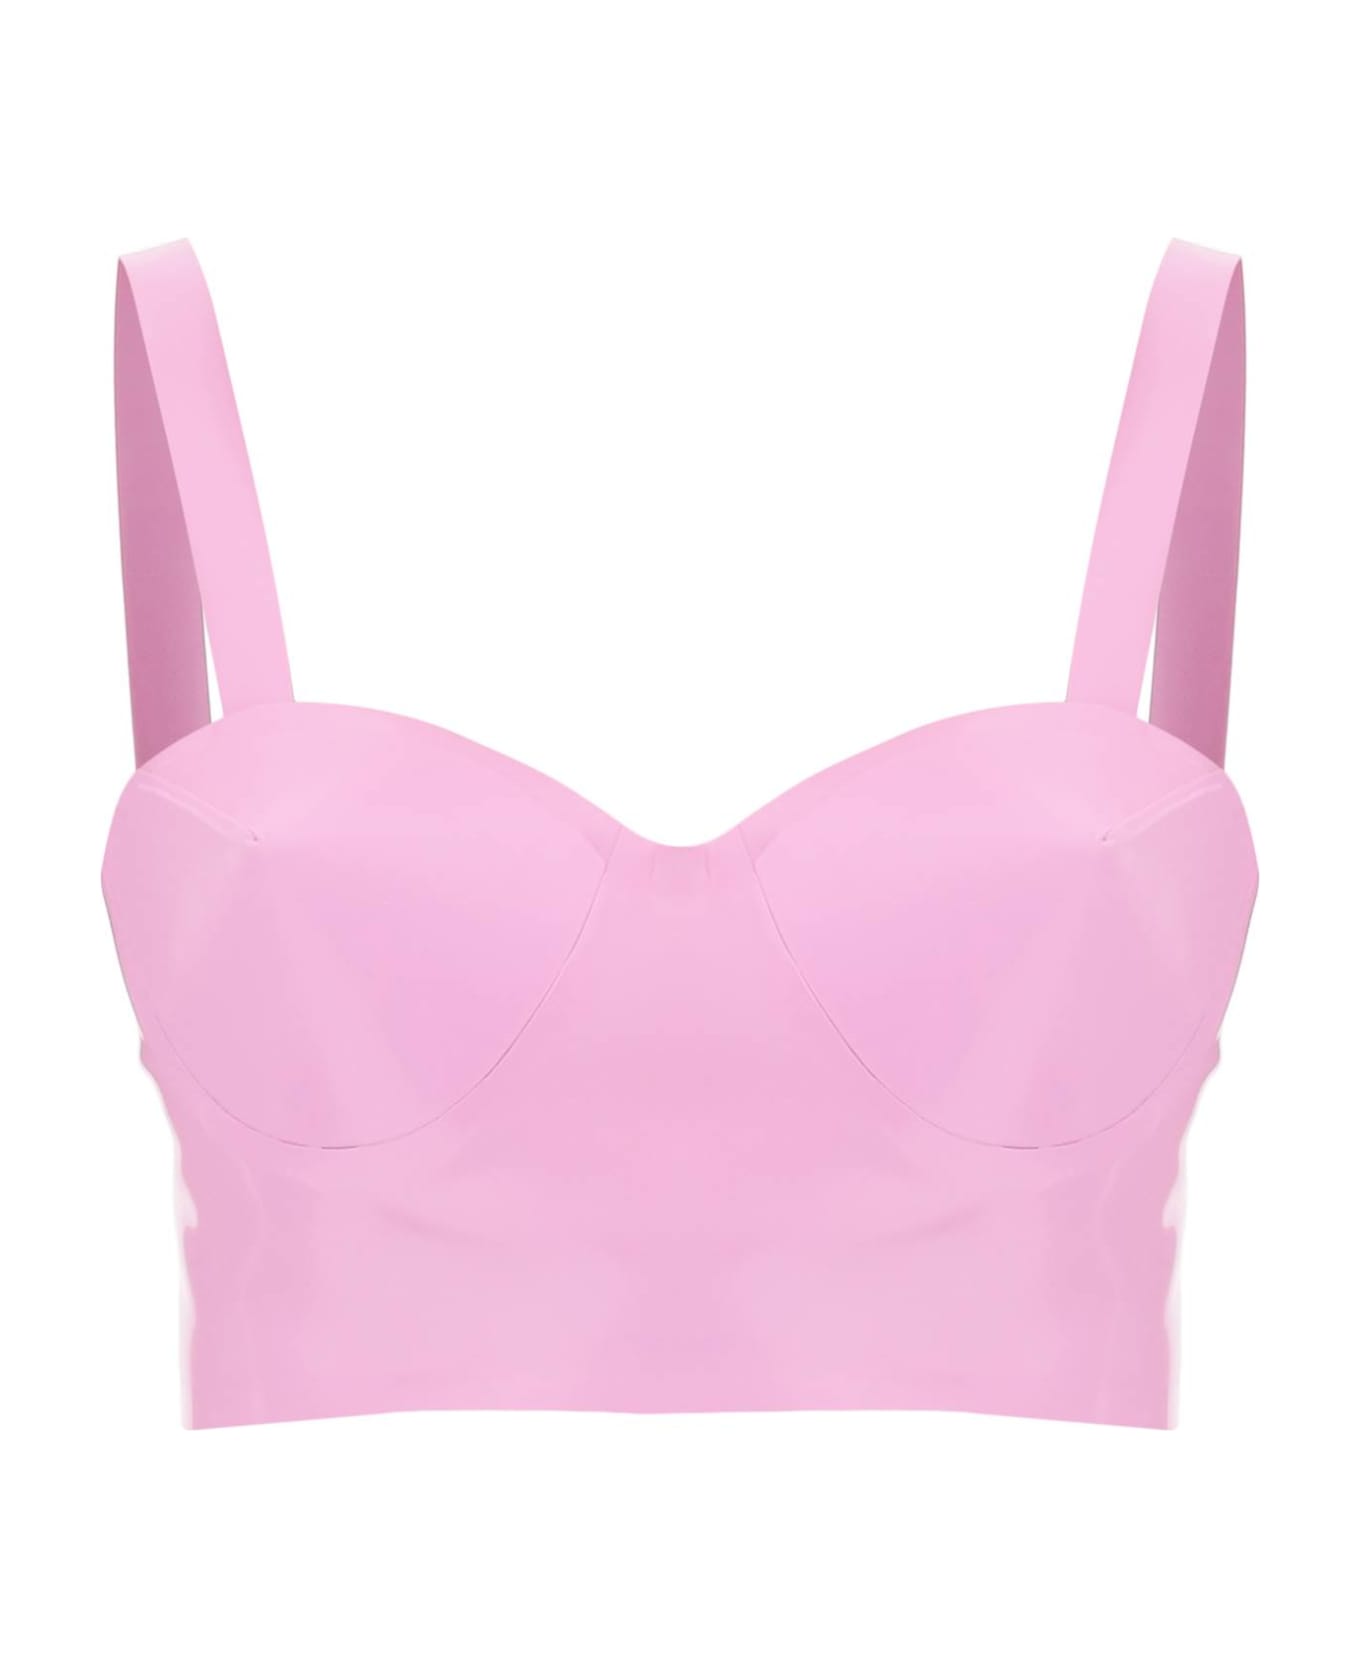 Maison Margiela Latex Top With Bullet Cups - LILAC (Pink) ブラジャー